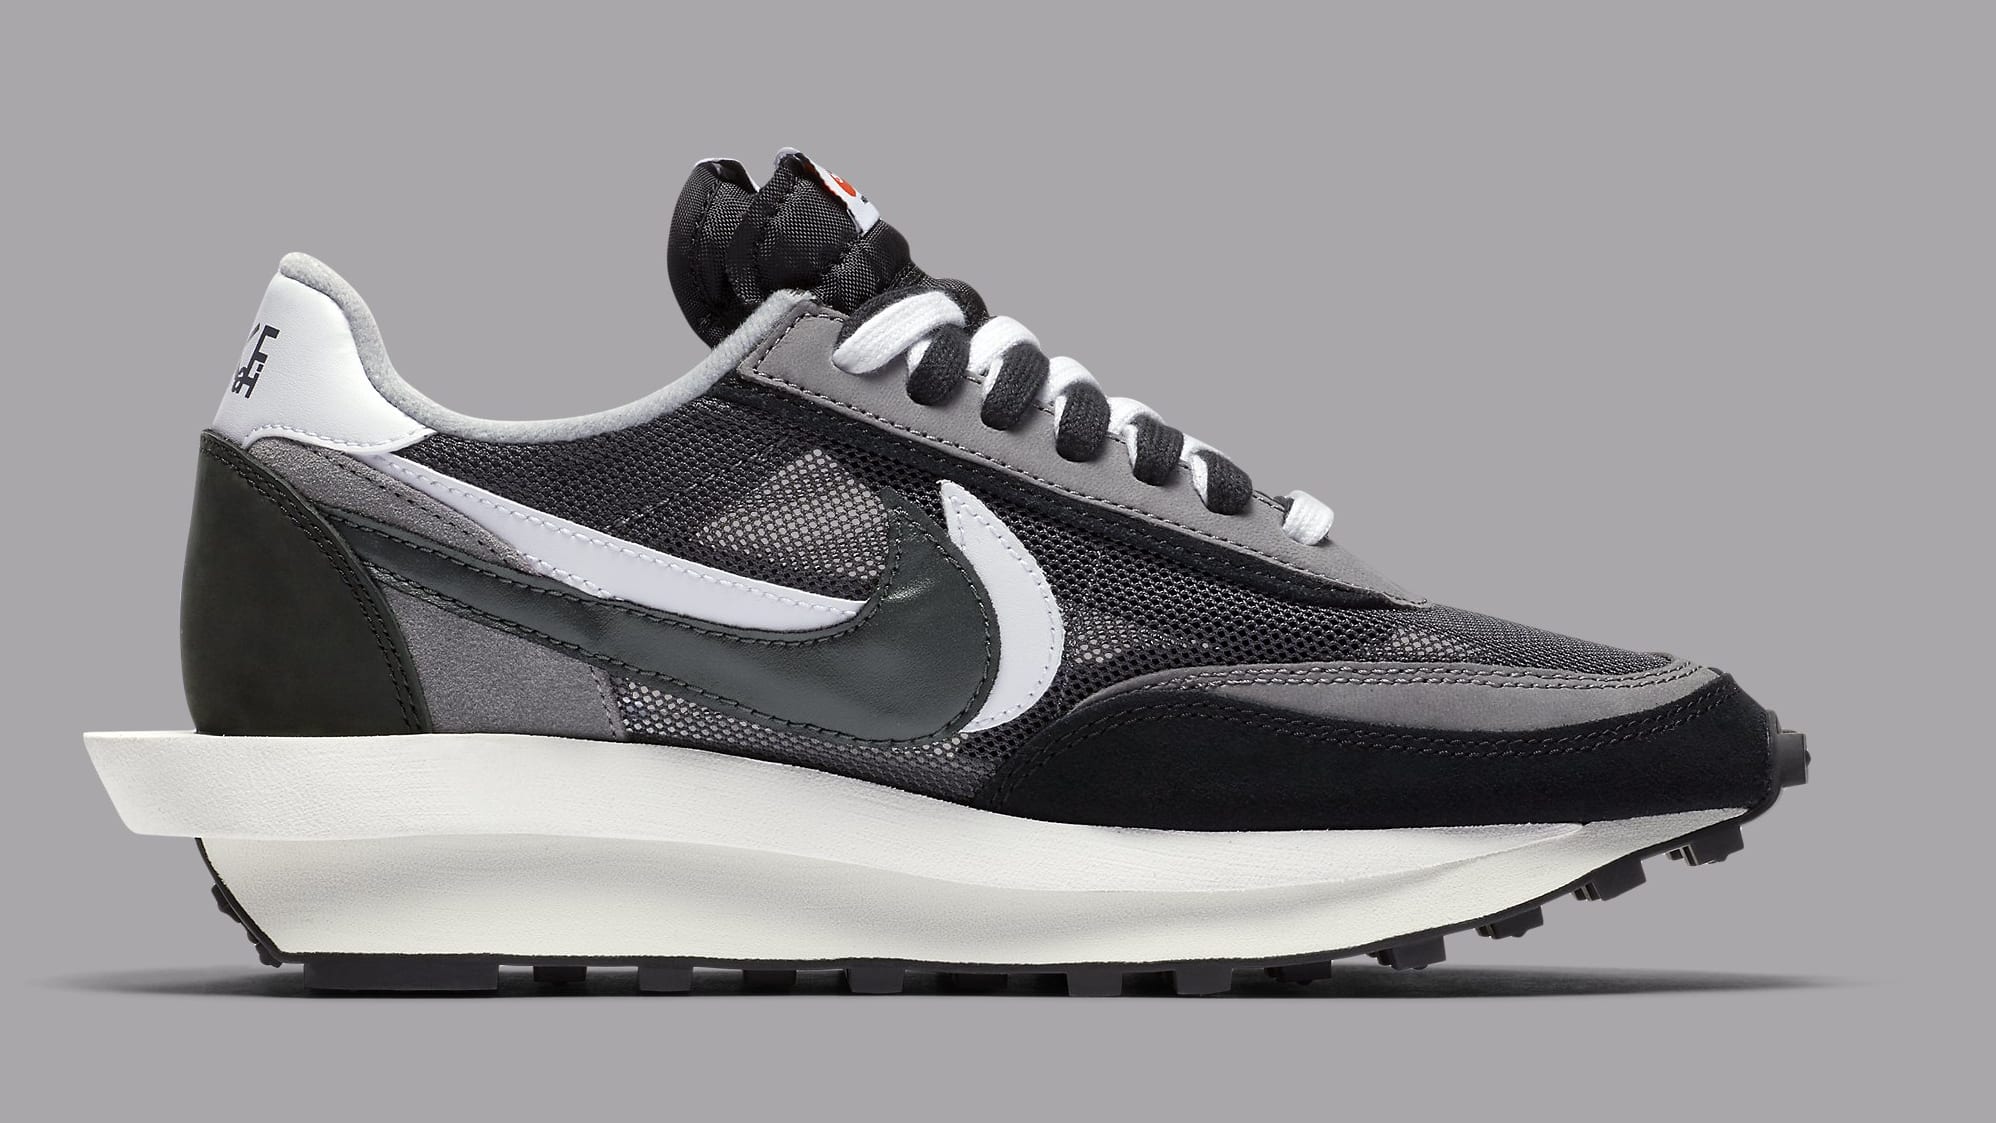 Sacai x Nike LDWaffle Black Anthracite Release Date BV0073-001 Medial